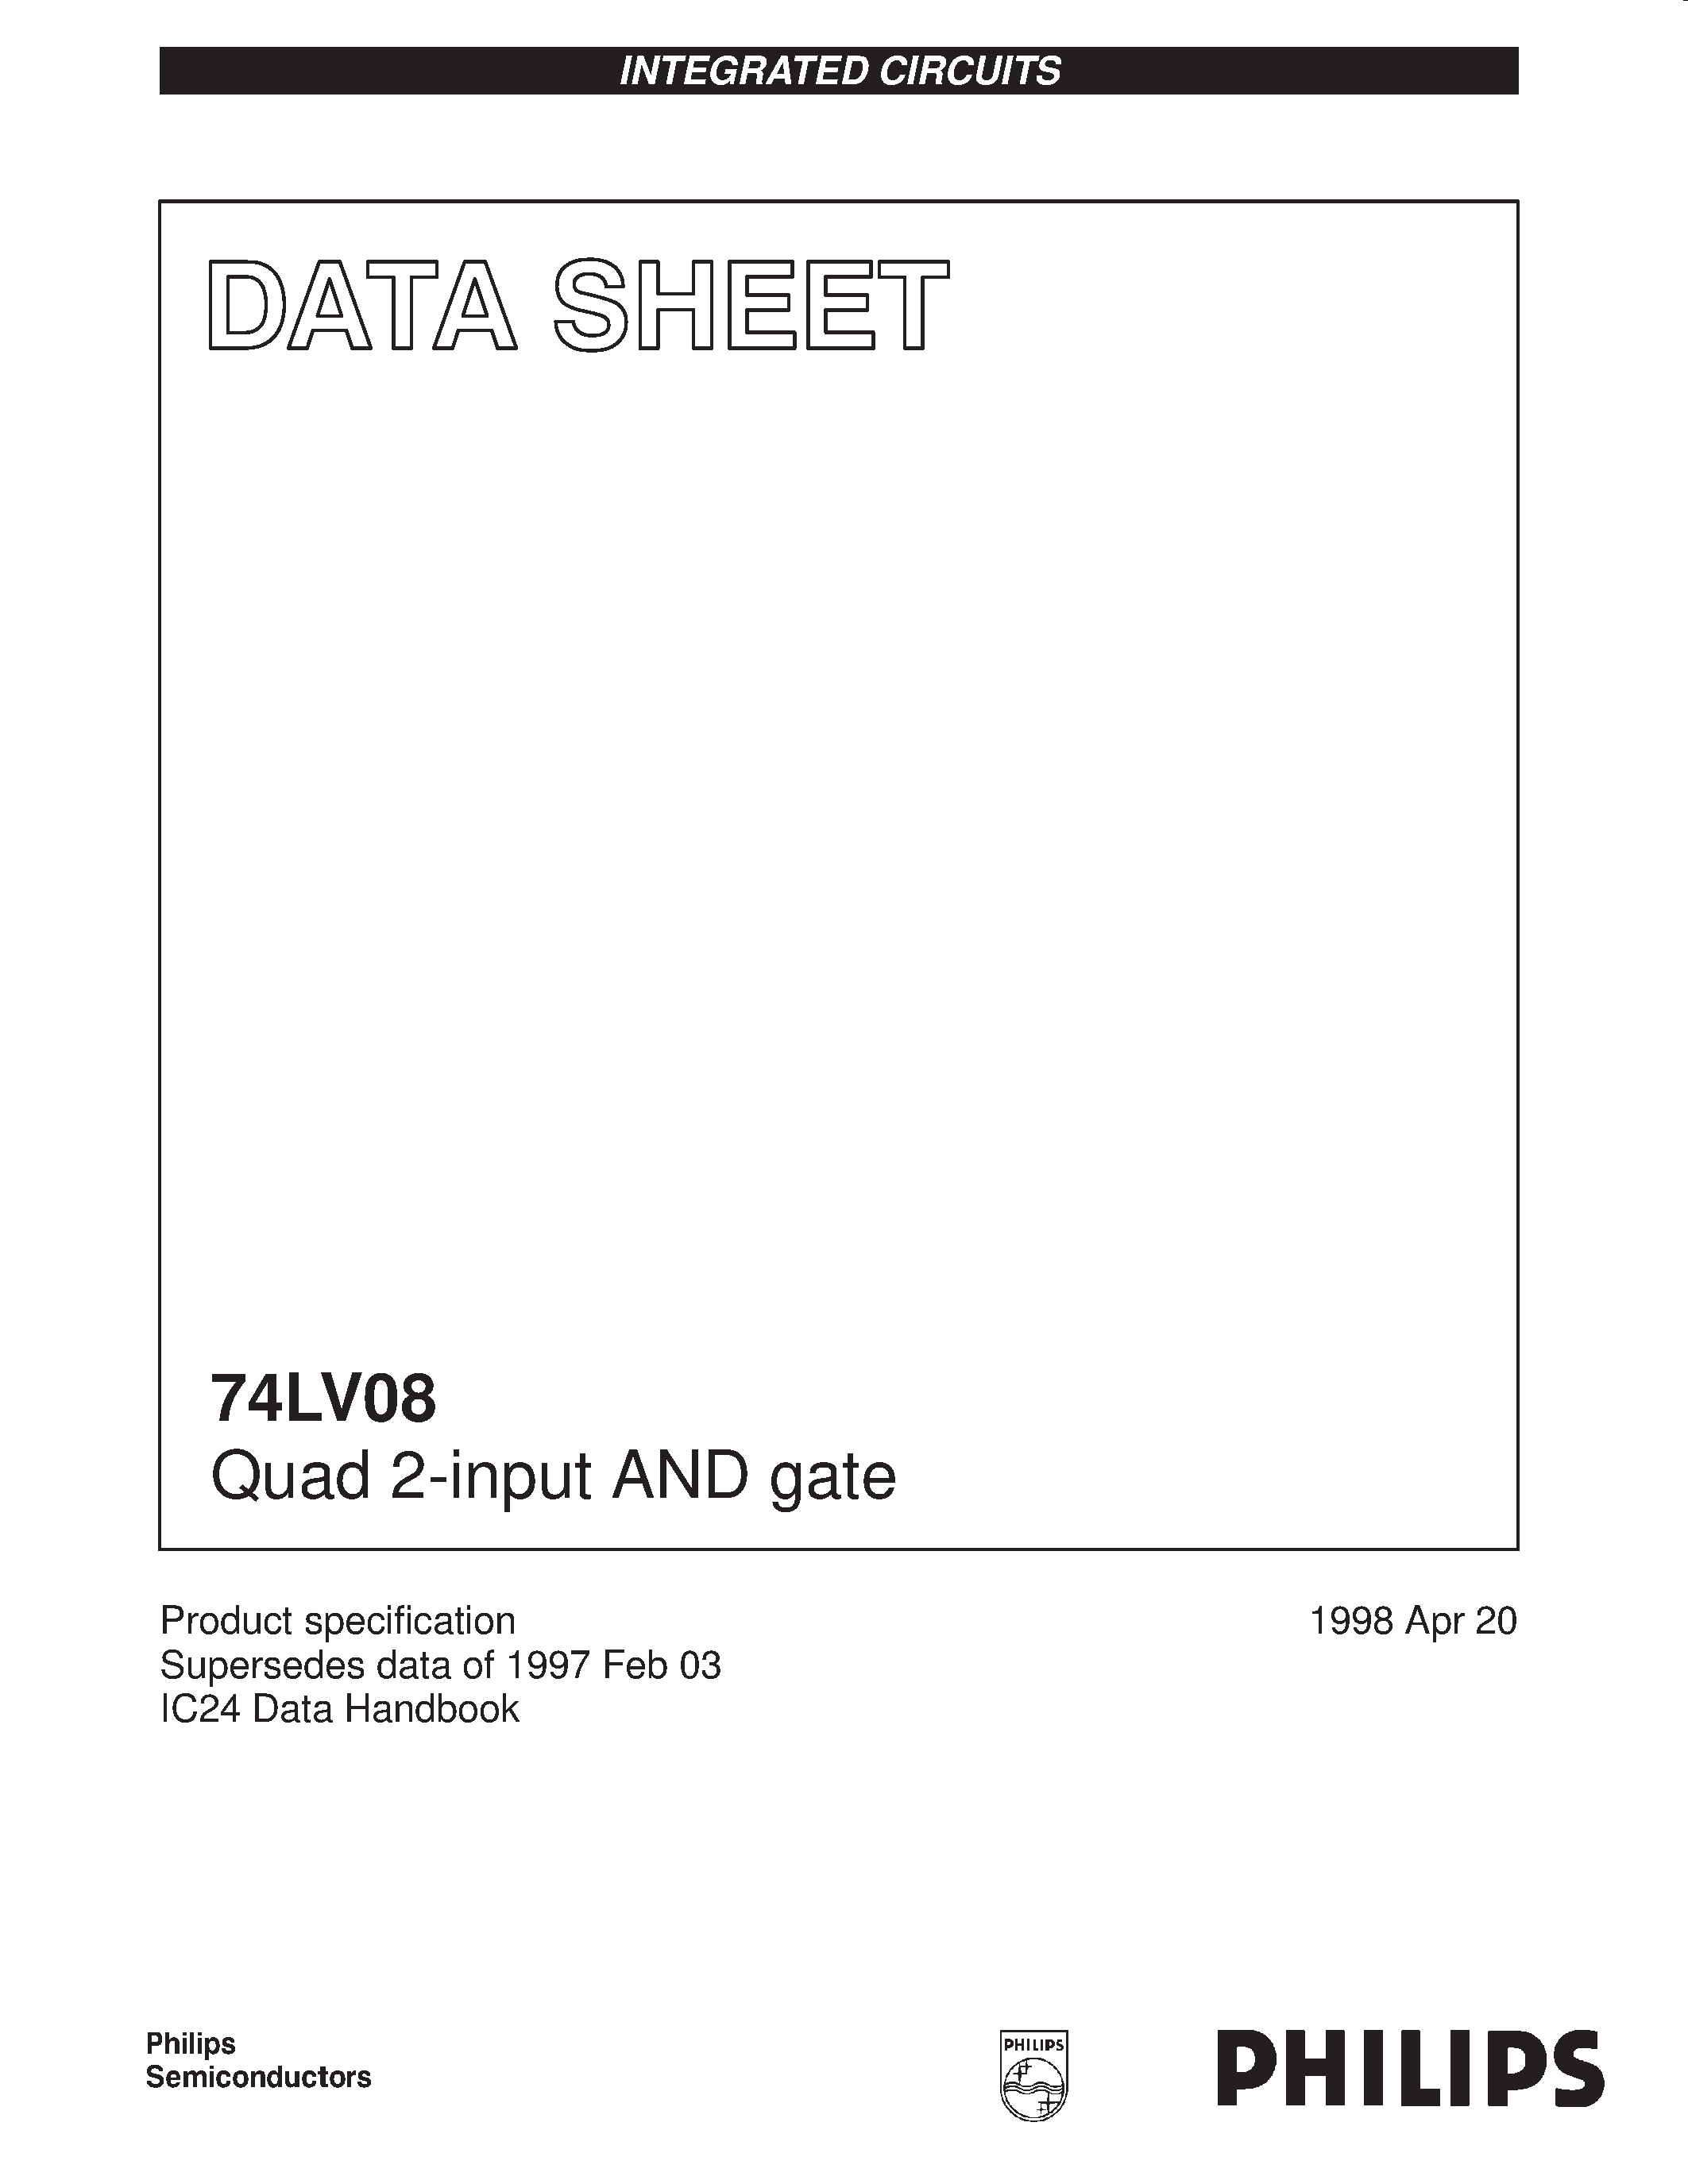 Datasheet 74LV08 - Quad 2-input AND gate page 1